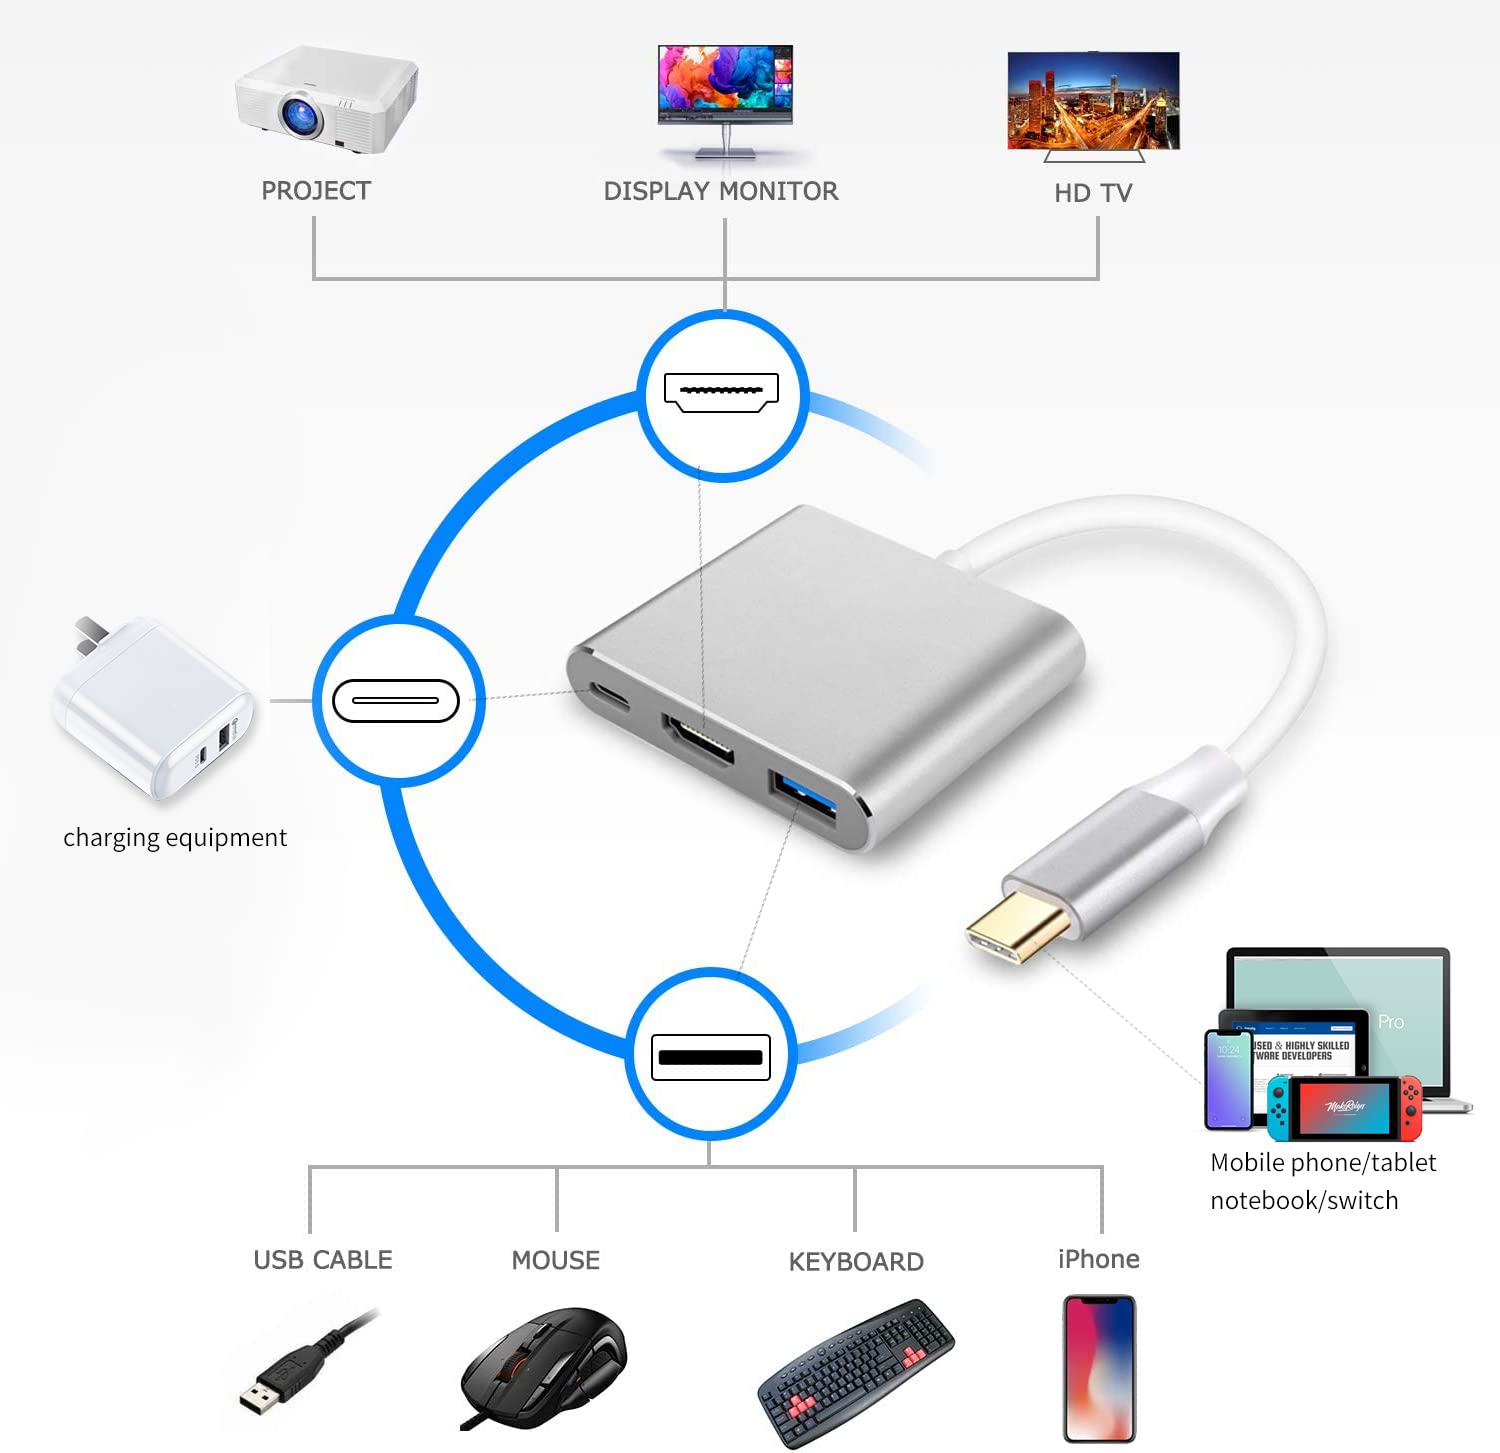 Battony USB C to HDMI Adapter USB Type C Adapter Multiport AV Converter with 4K HDMI Output USB C Port & USD3.0 Fasting Charging Port Compatible for MacBook Pro / Air 2019/2018 iPad Pro 2019